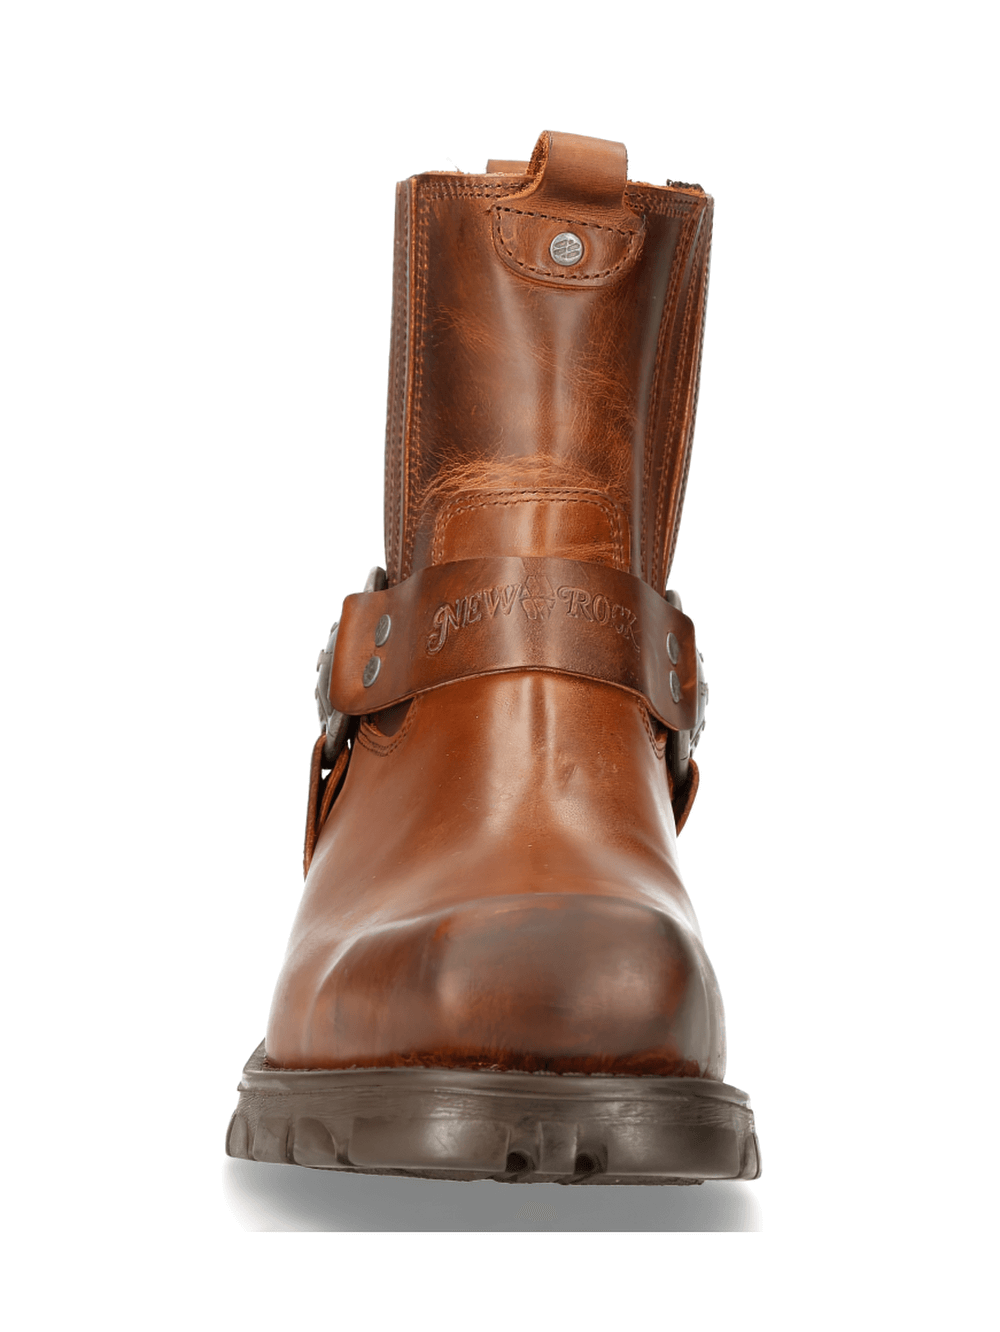 NEW ROCK Elastic Side Panel Rugged Brown Leather Ankle Boots